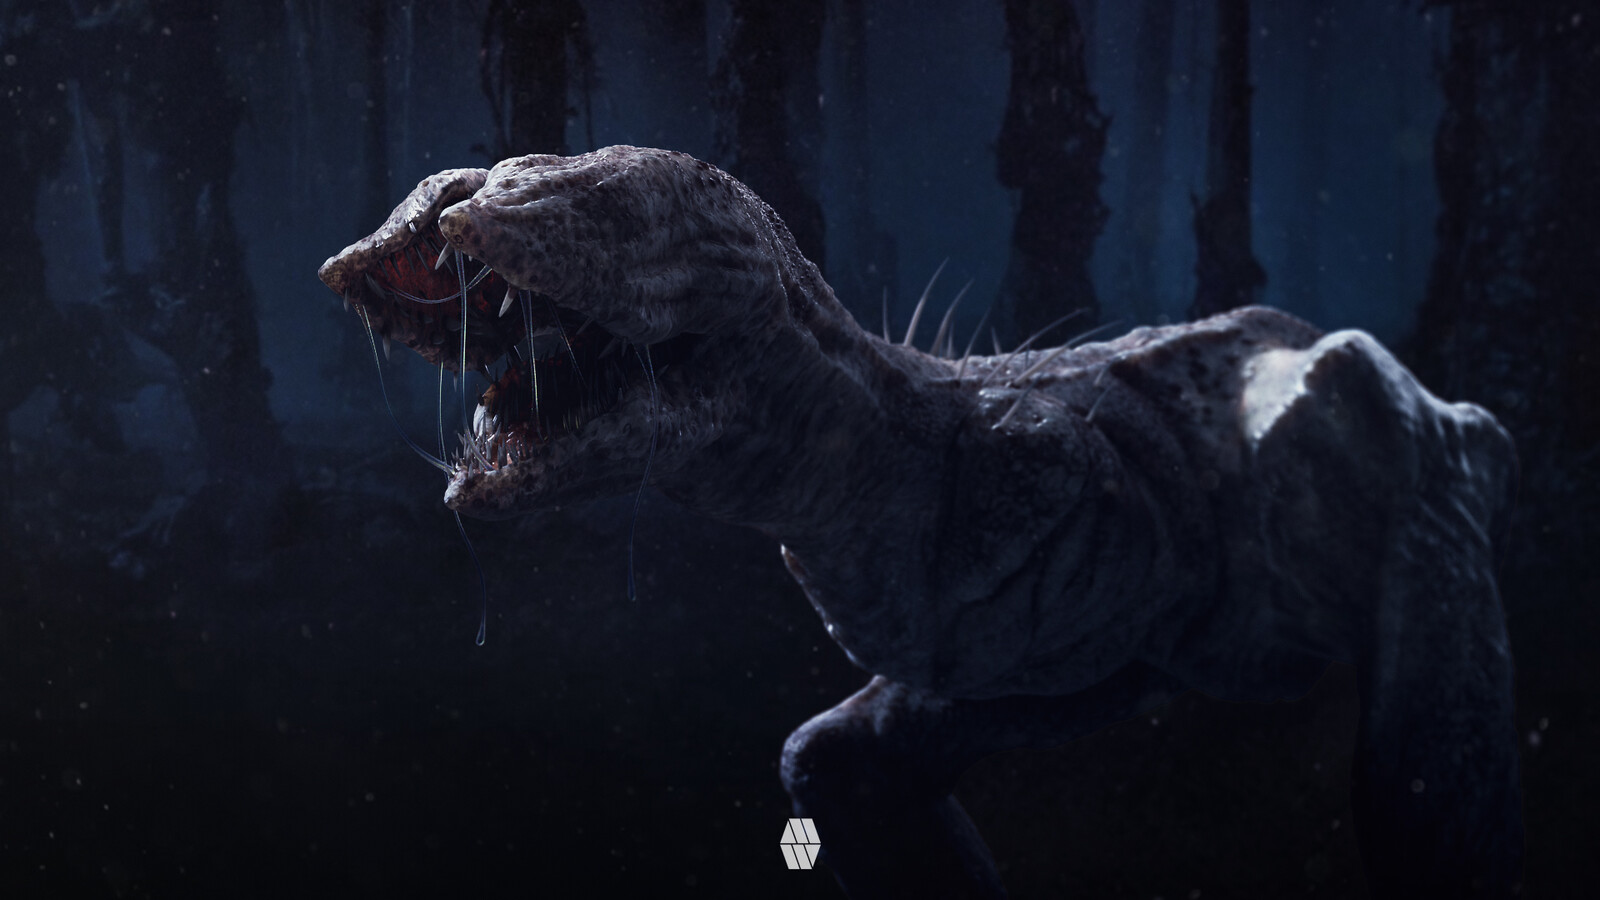 Stranger Things Creature Inspired Concept - Personal Project 